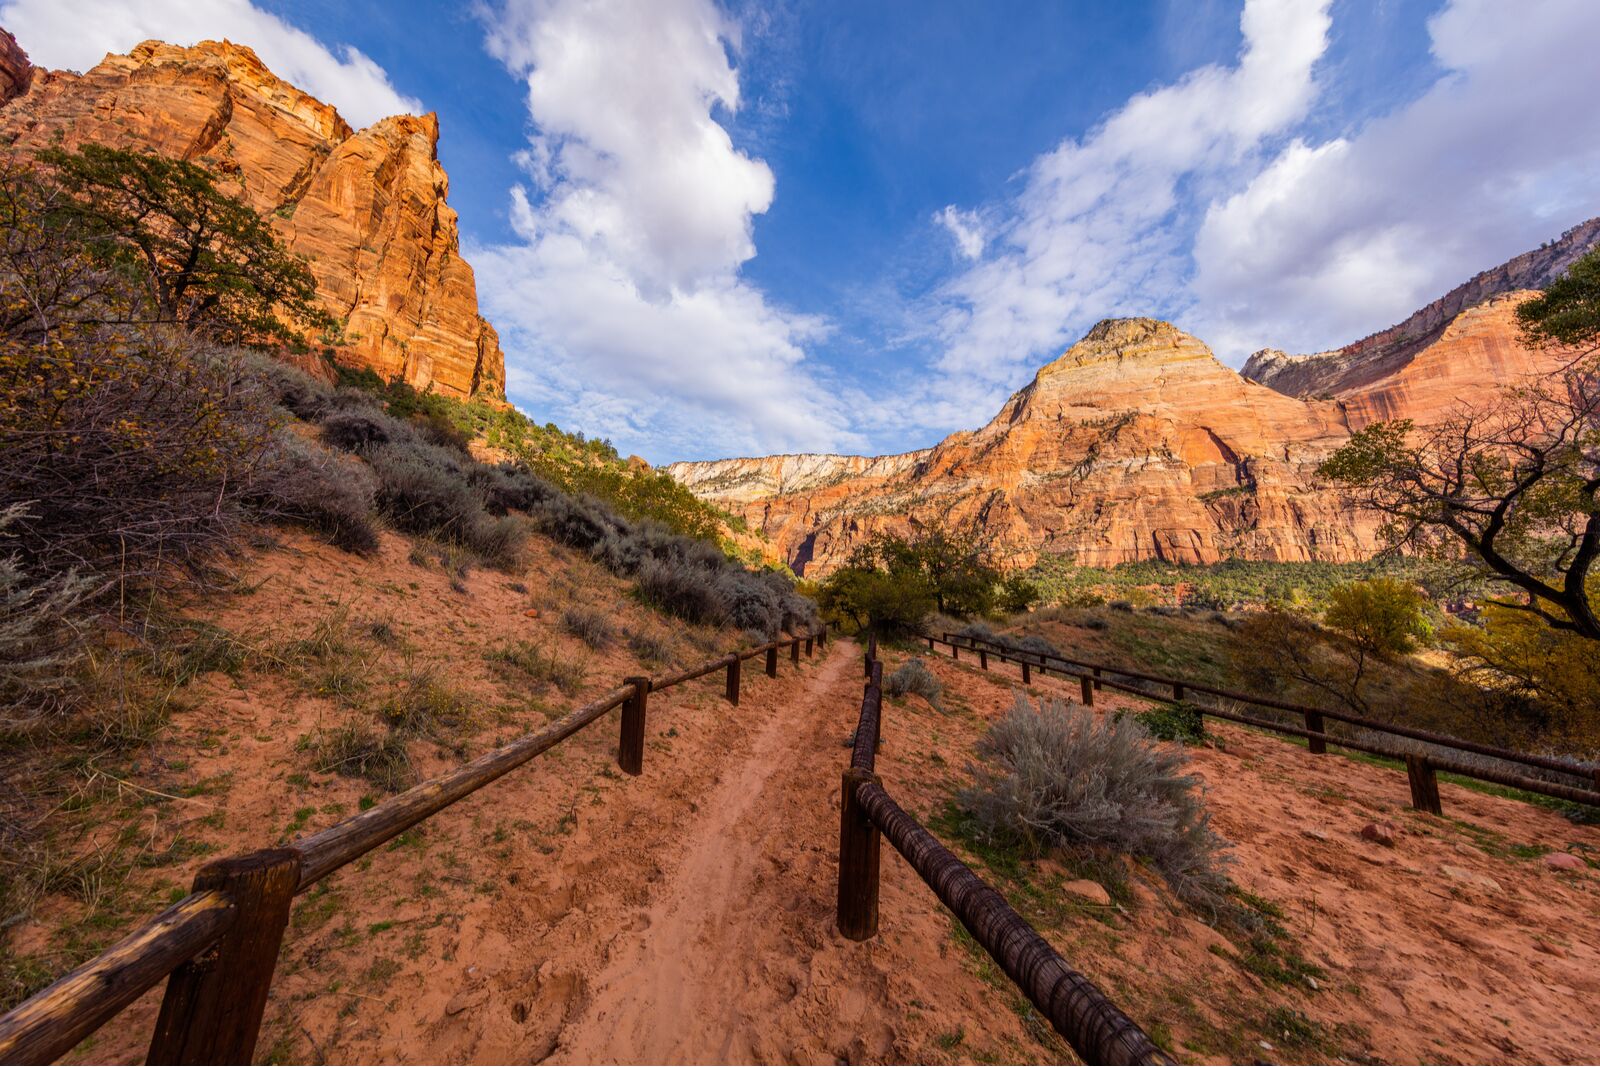 Zion national park hiking trail - trail in the canyon